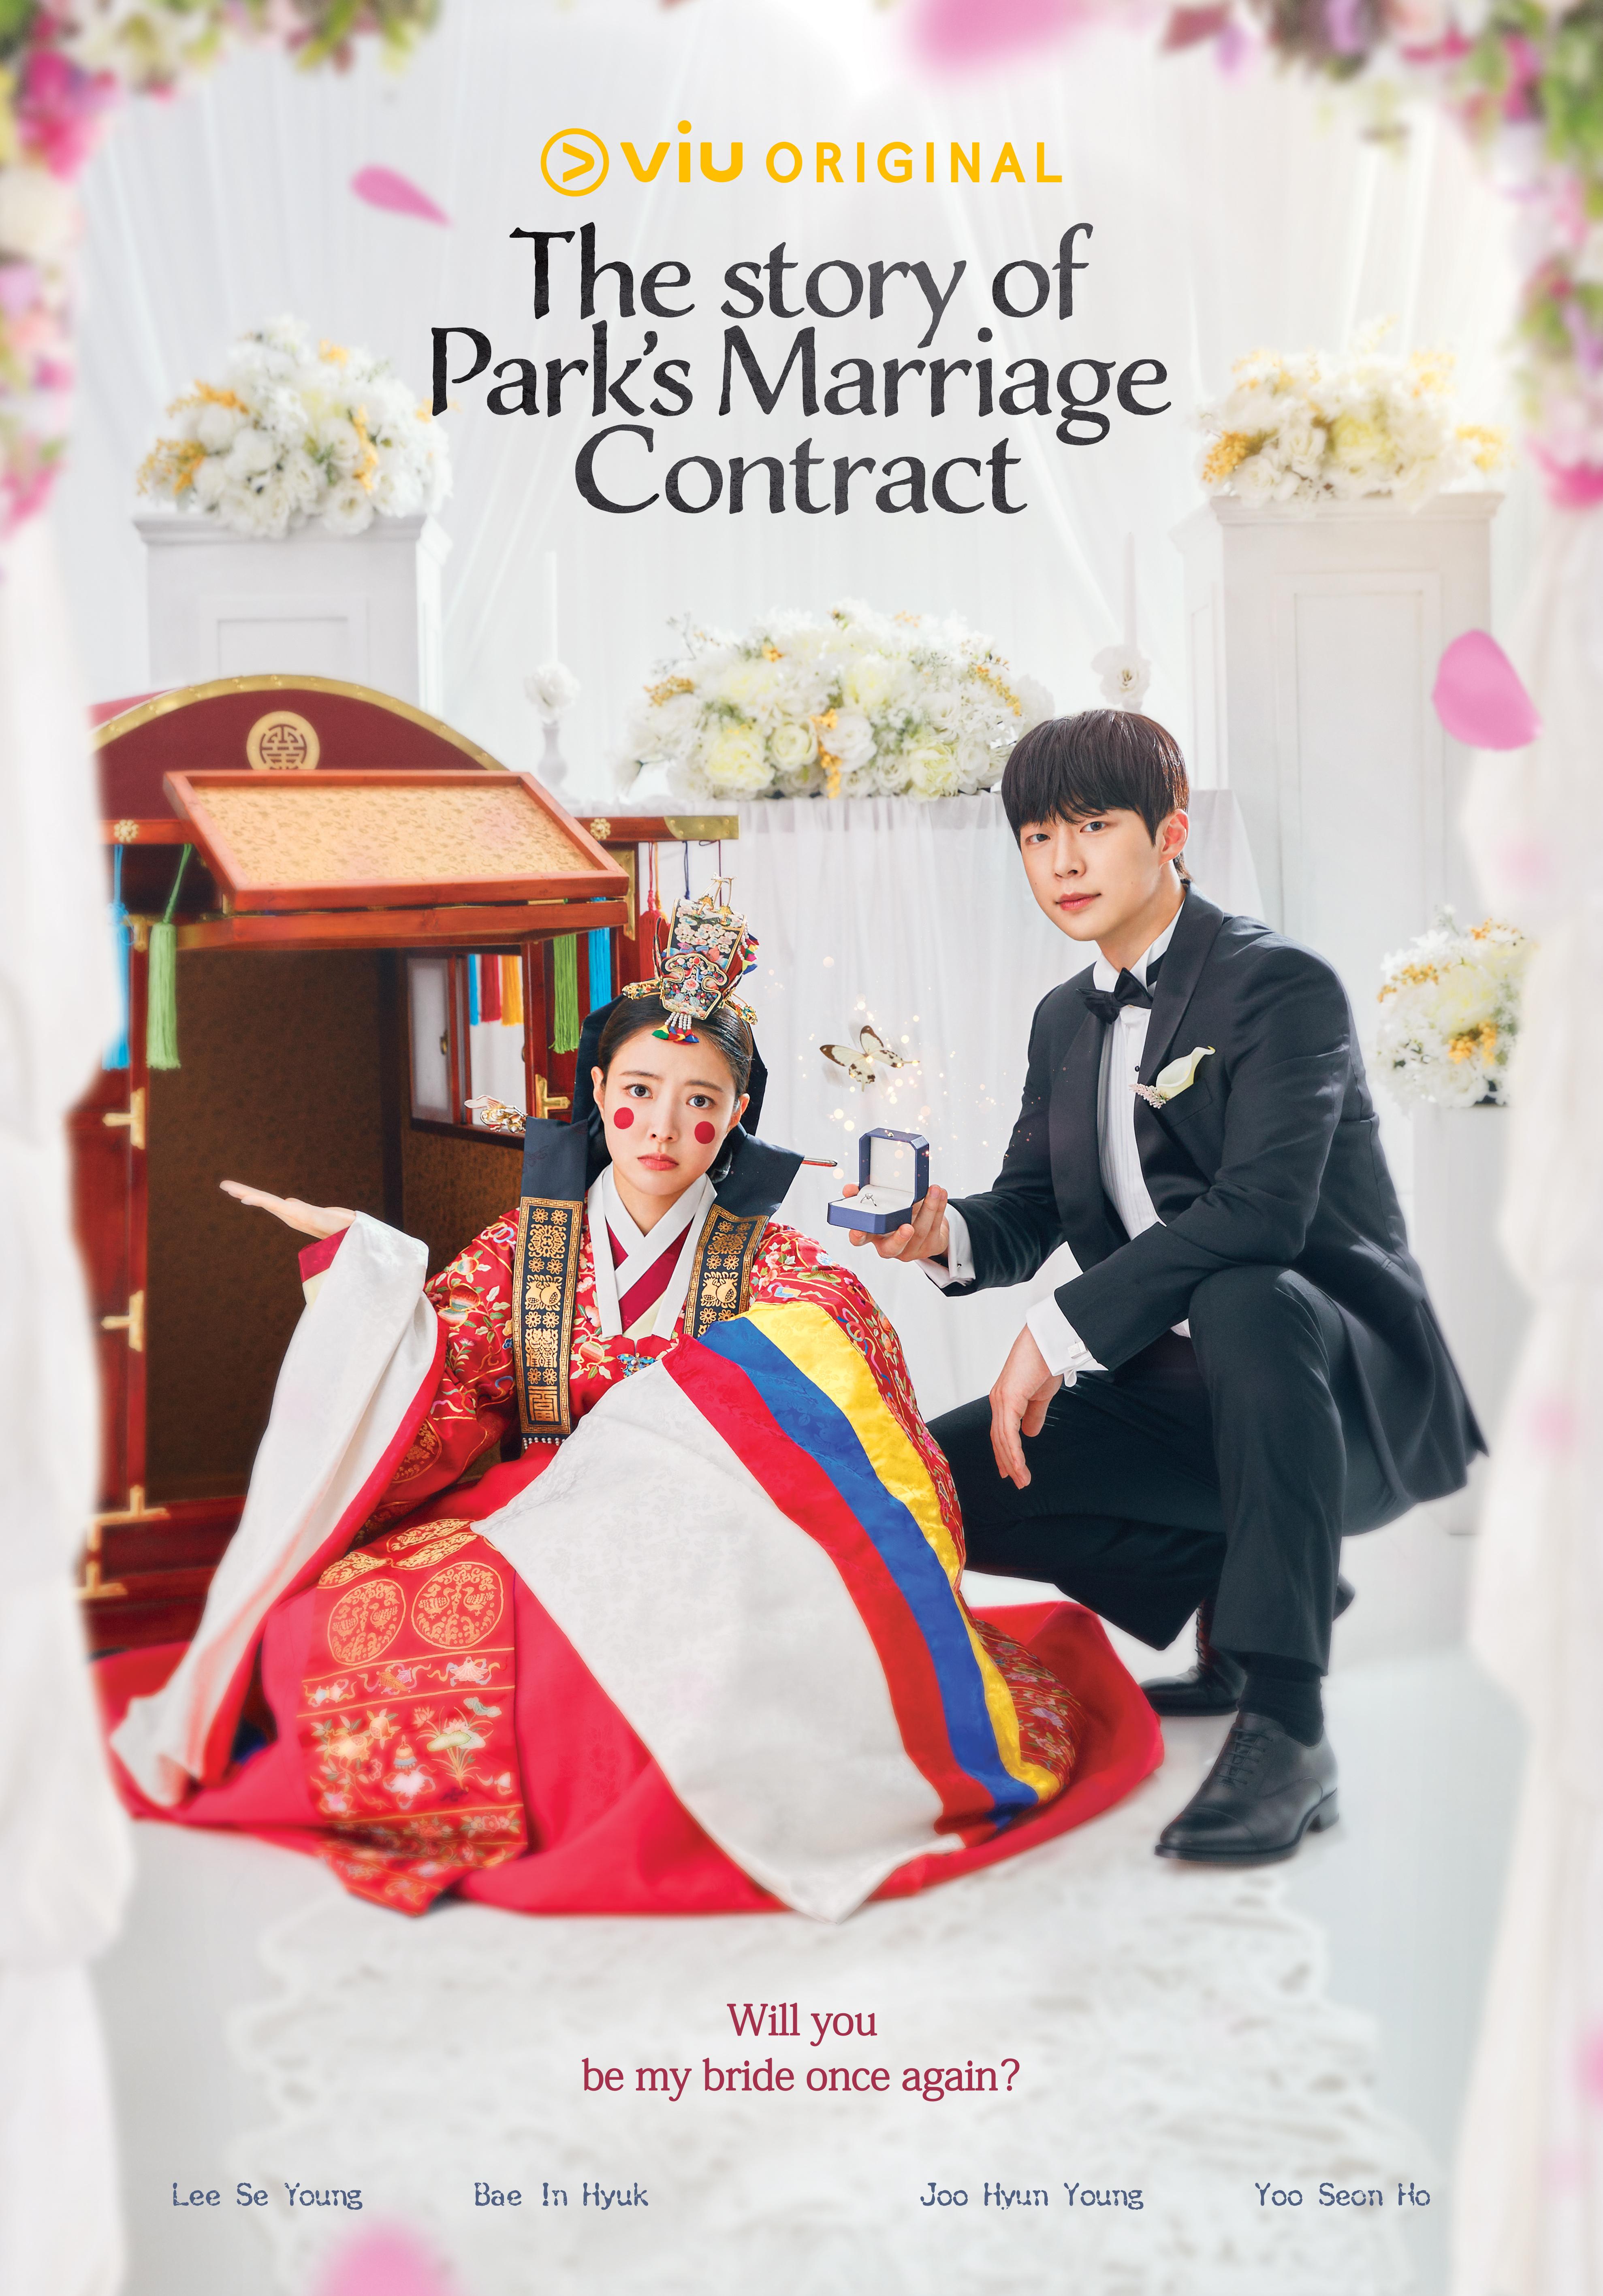 The Story of Park's Marriage Contract ซับไทย | ตอนที่ 1-2 (ออนแอร์)